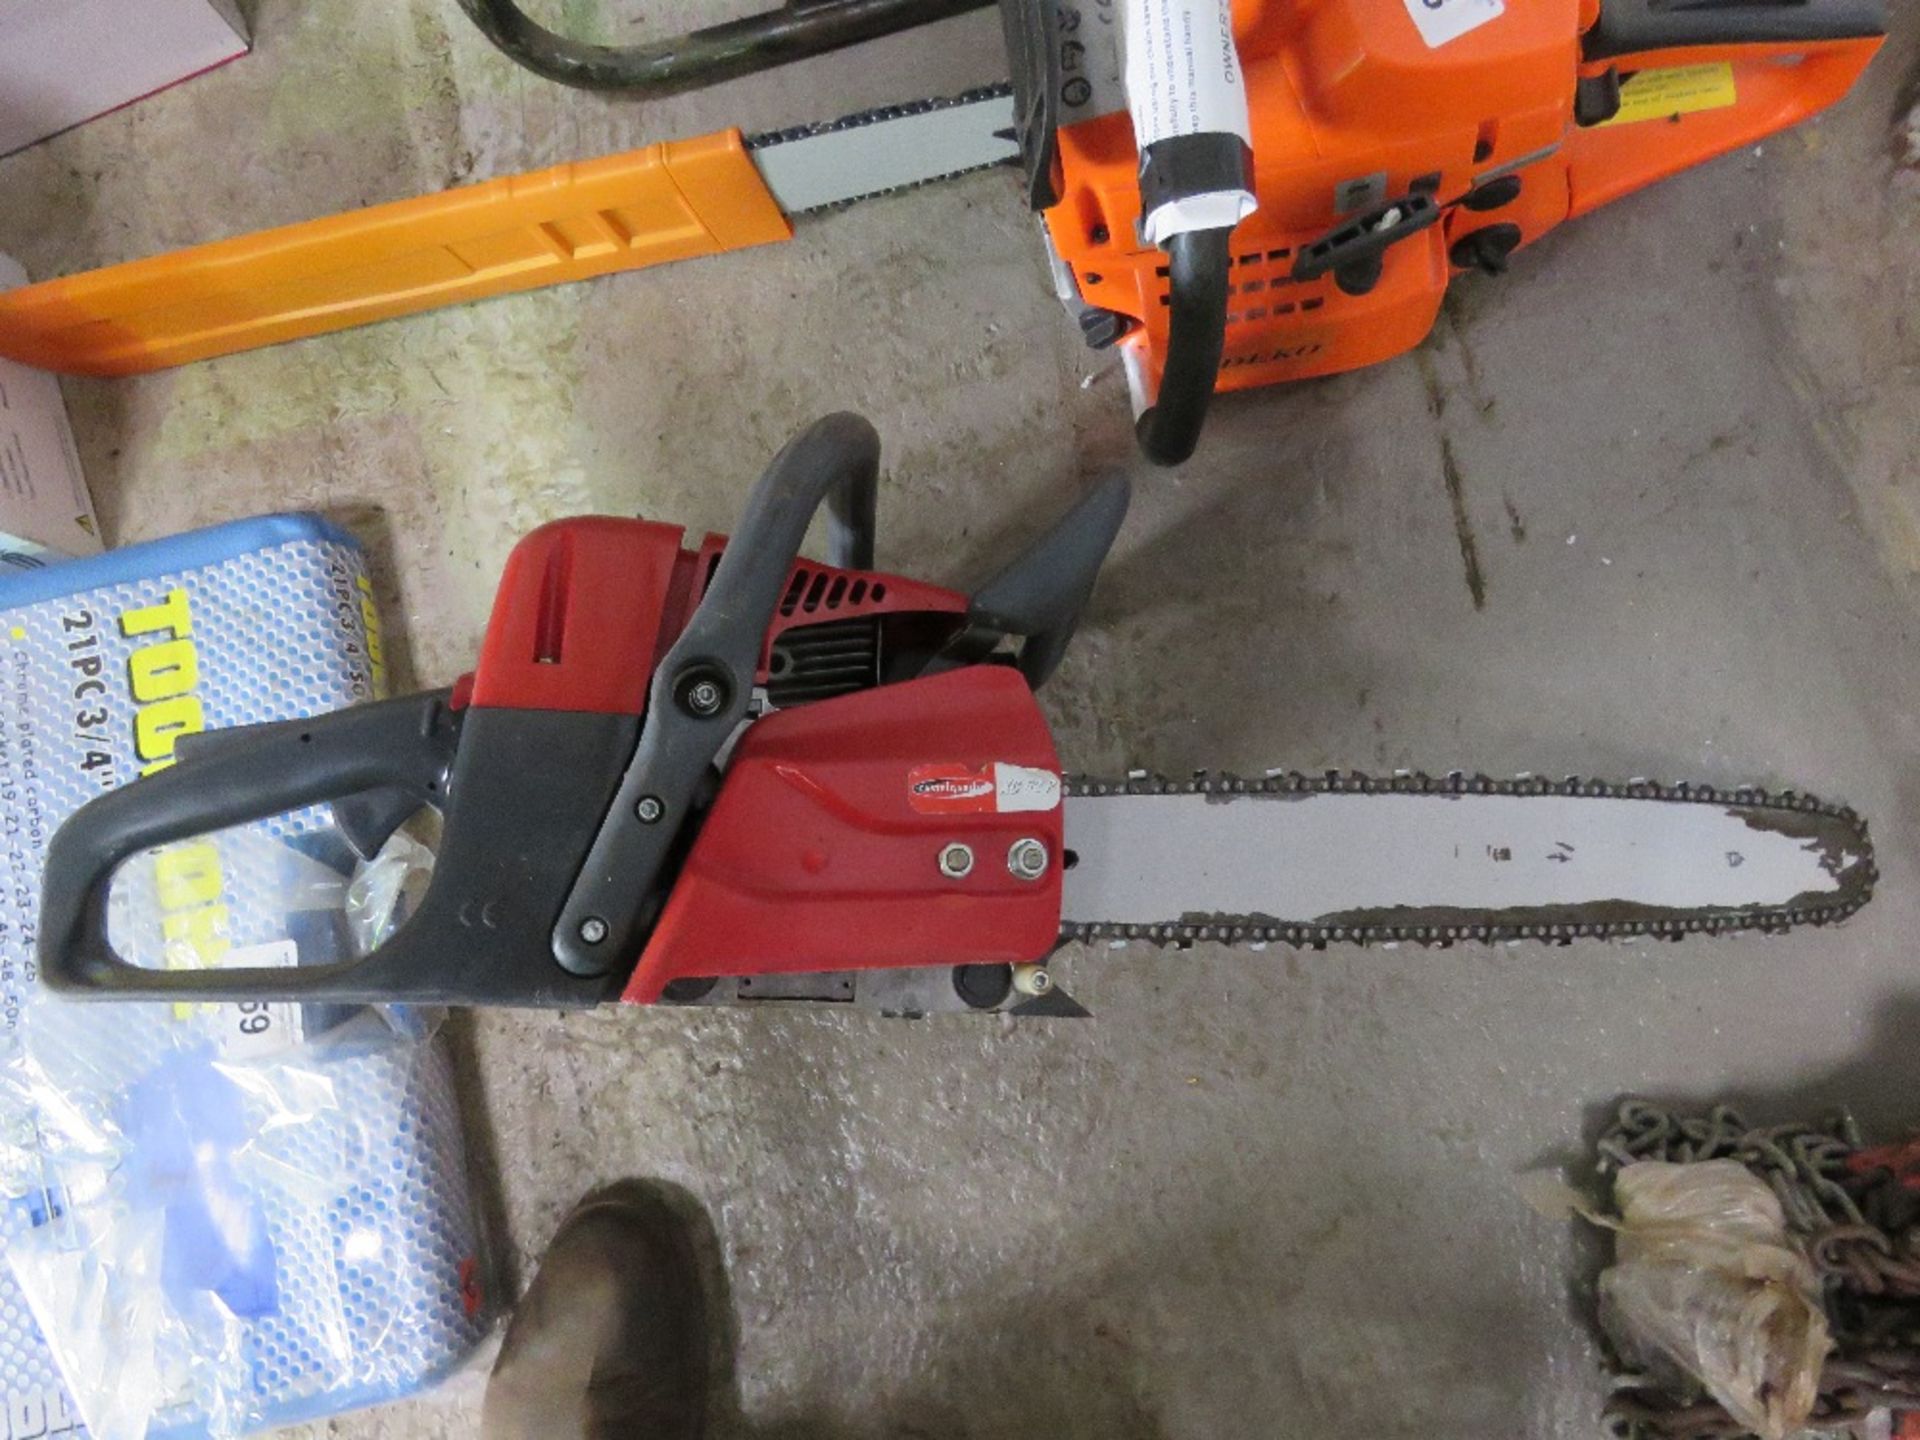 GARDENLINE PETROL ENGINED CHAINSAW. - Image 2 of 3